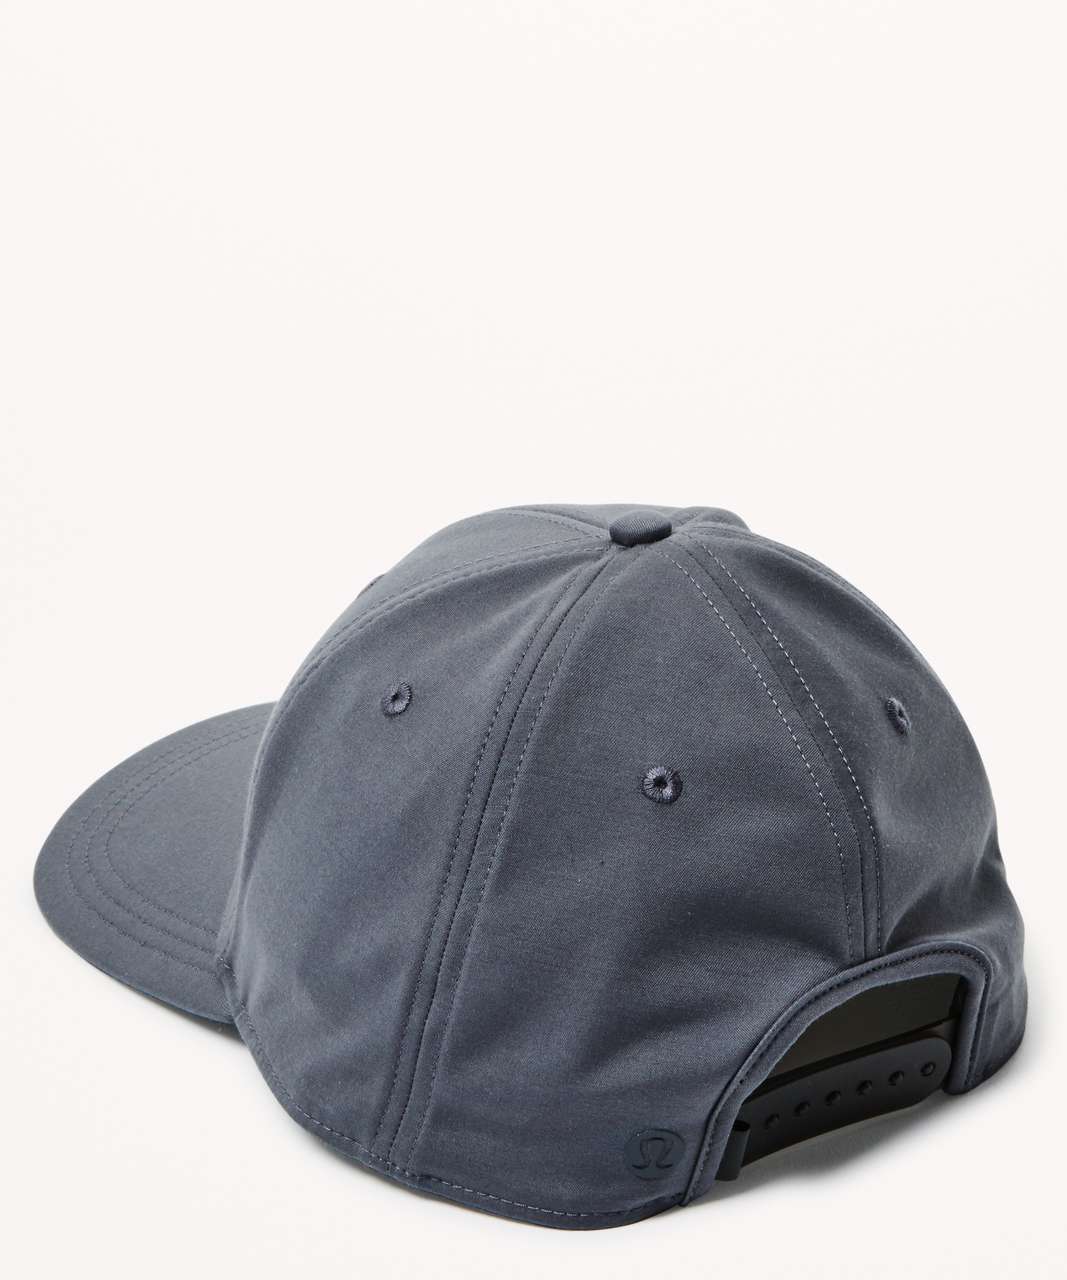 Lululemon On The Fly Ball Cap - Anchor (First Release)